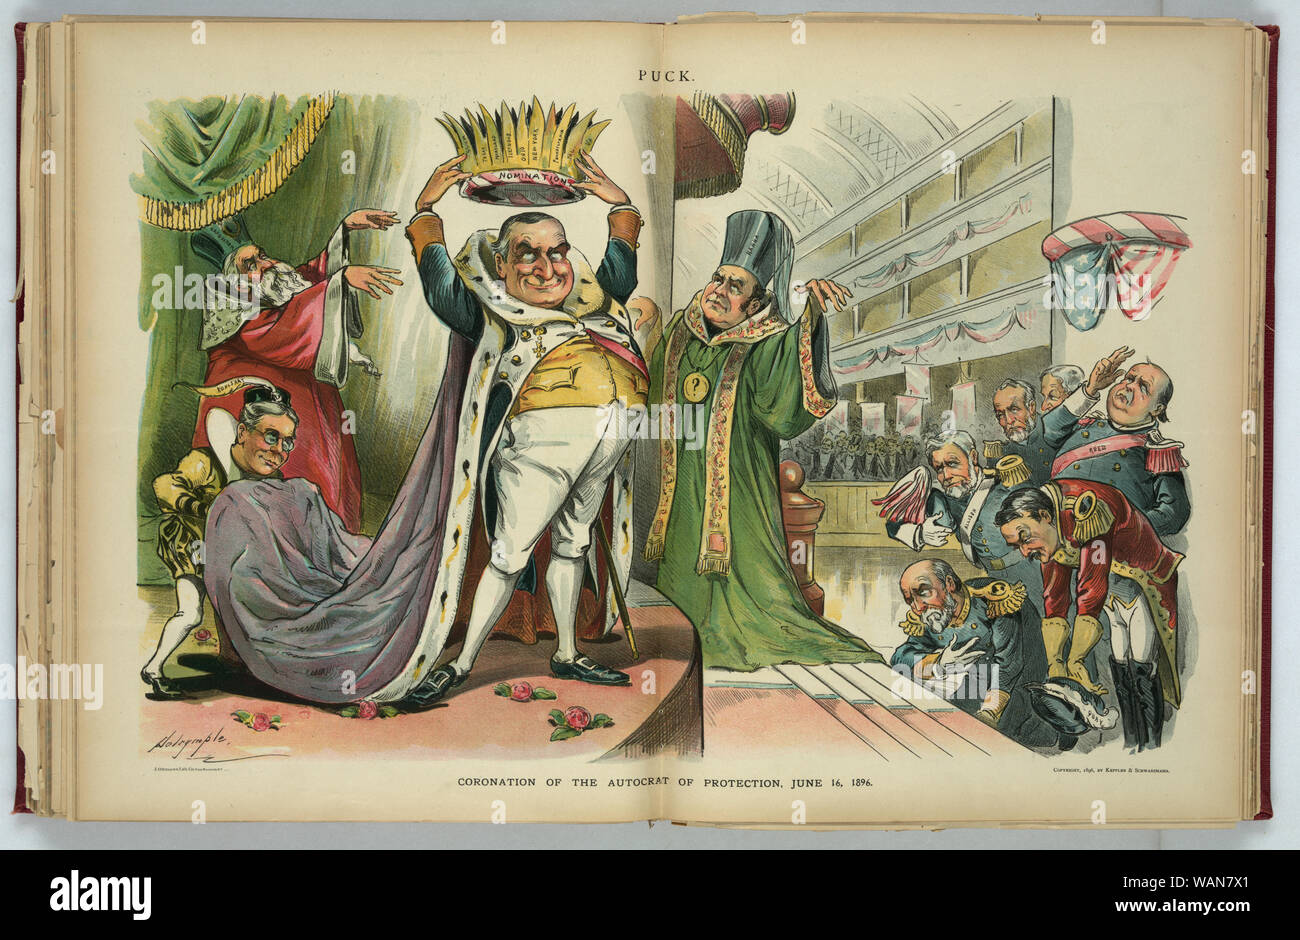 Coronation of the autocrat of protection, June 16, 1896 / Dalrymple. Stock Photo